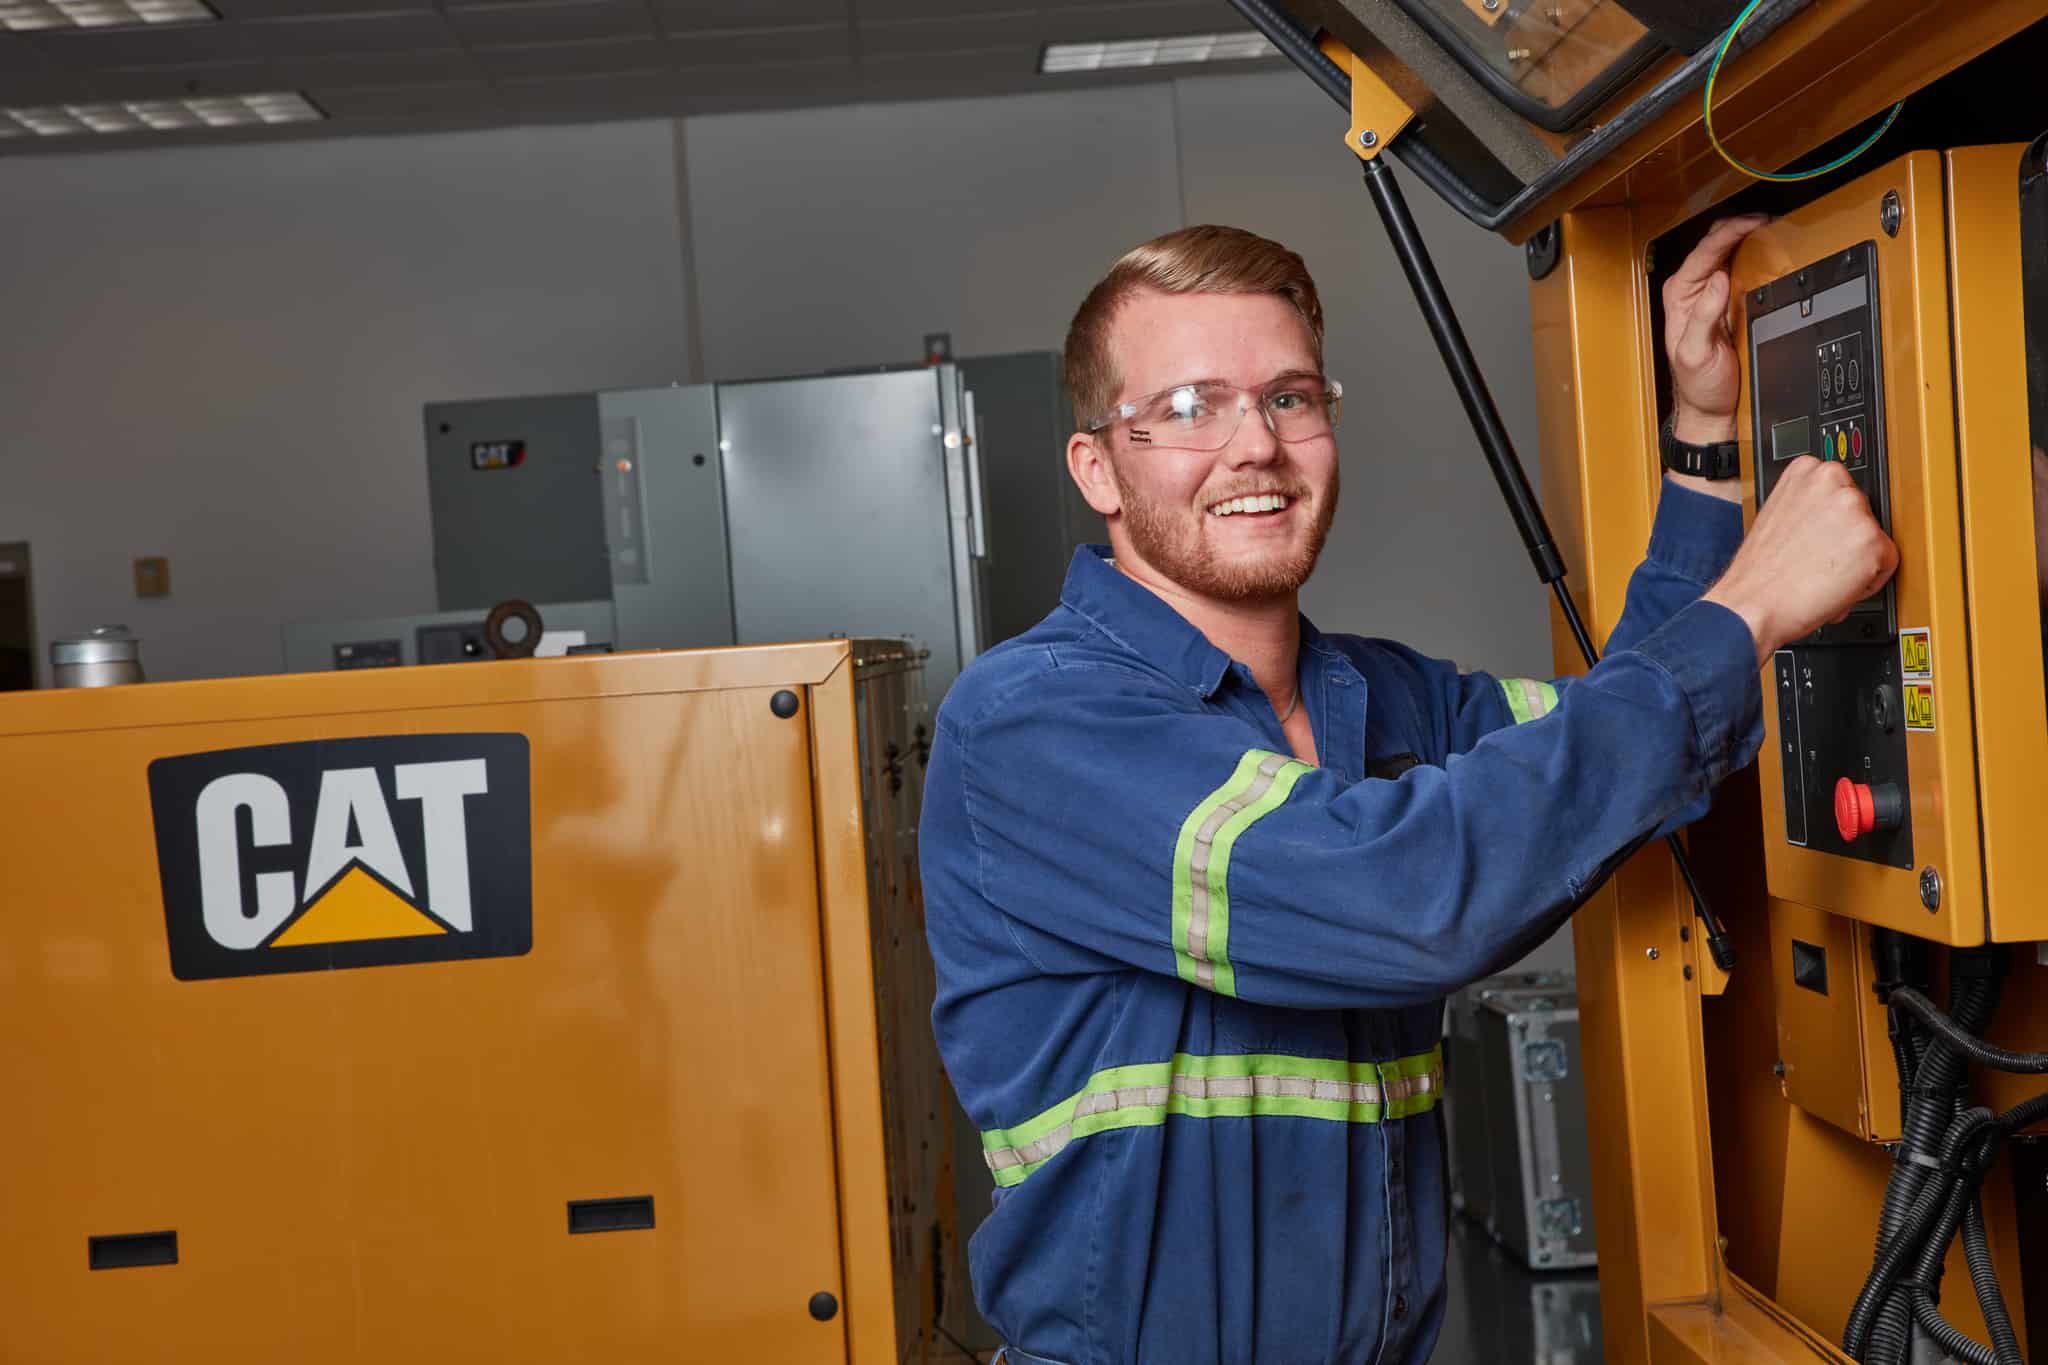 The Caterpillar Heavy Equipment Dealer’s Service Technology Diesel and Electric Power Generation programs are considered “trade” programs that have high income potential for graduates. However, these students earn an associate degree and are hired even before graduating.